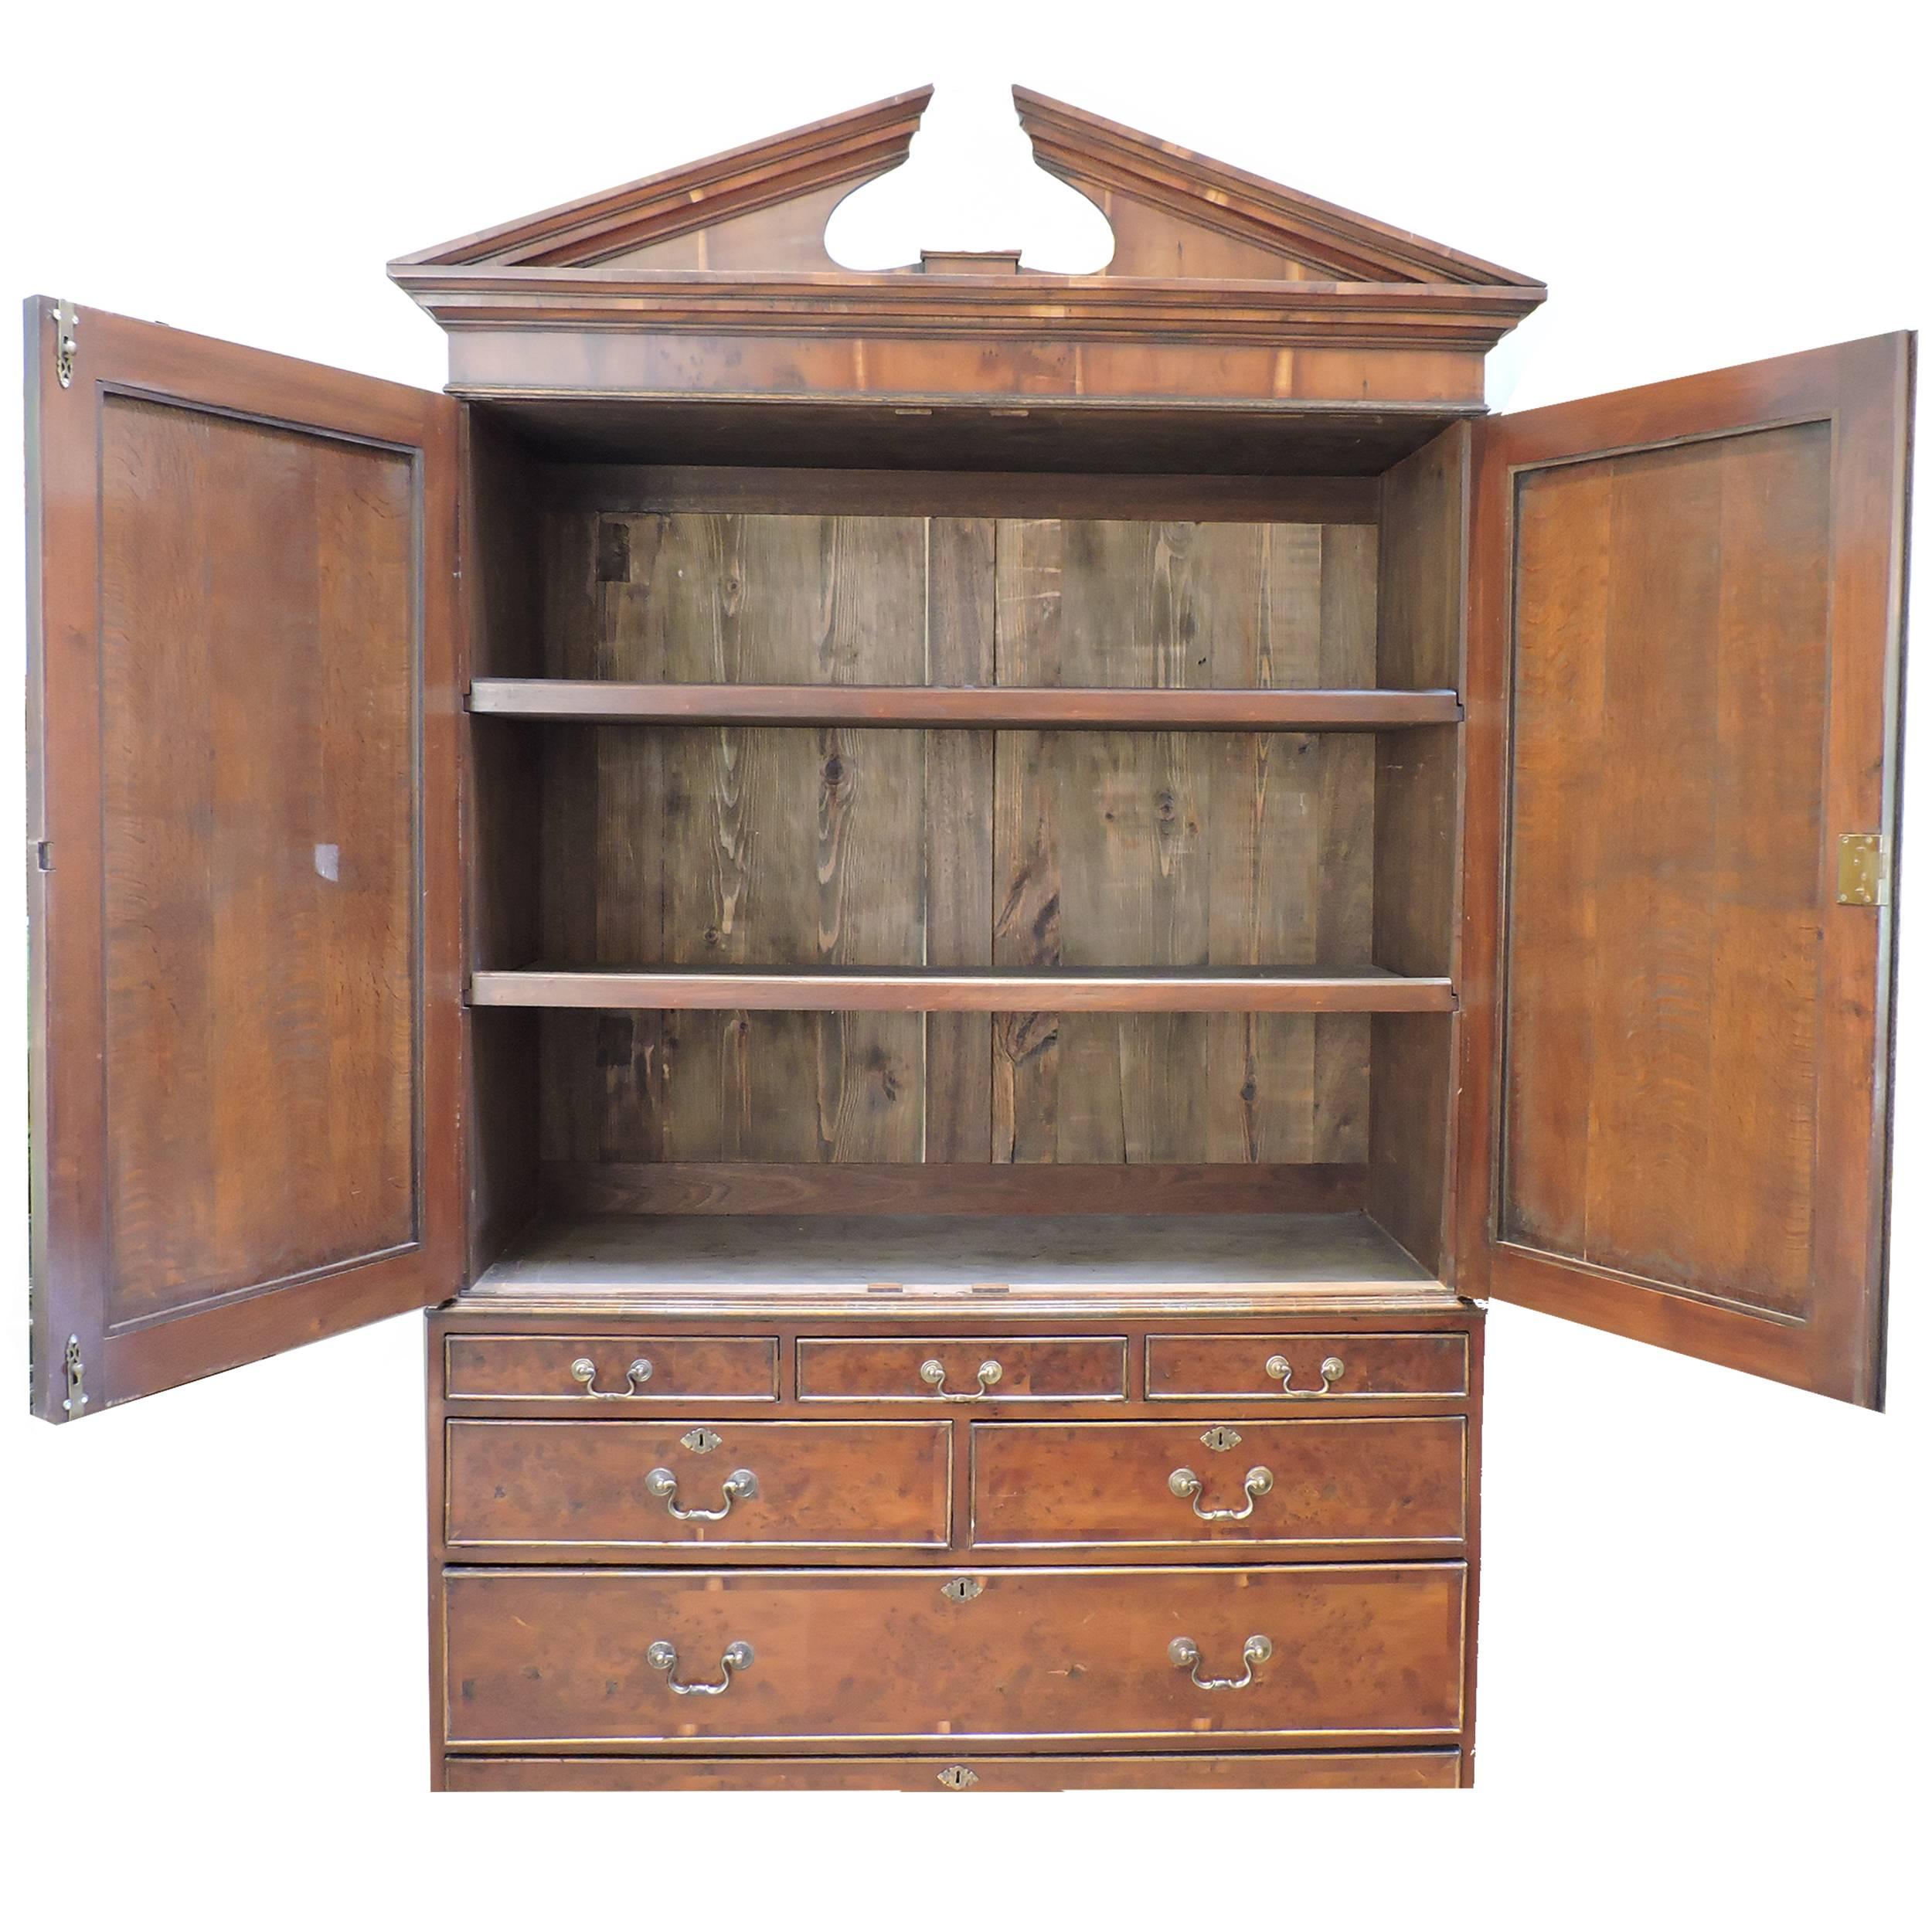 This George III solid mahogany linen press is monumental in stature. A two-door cabinet conceals rare original pullout drawers with a classical broken pediment above. A chest of drawers with original brass hardware anchors the piece. All drawers and